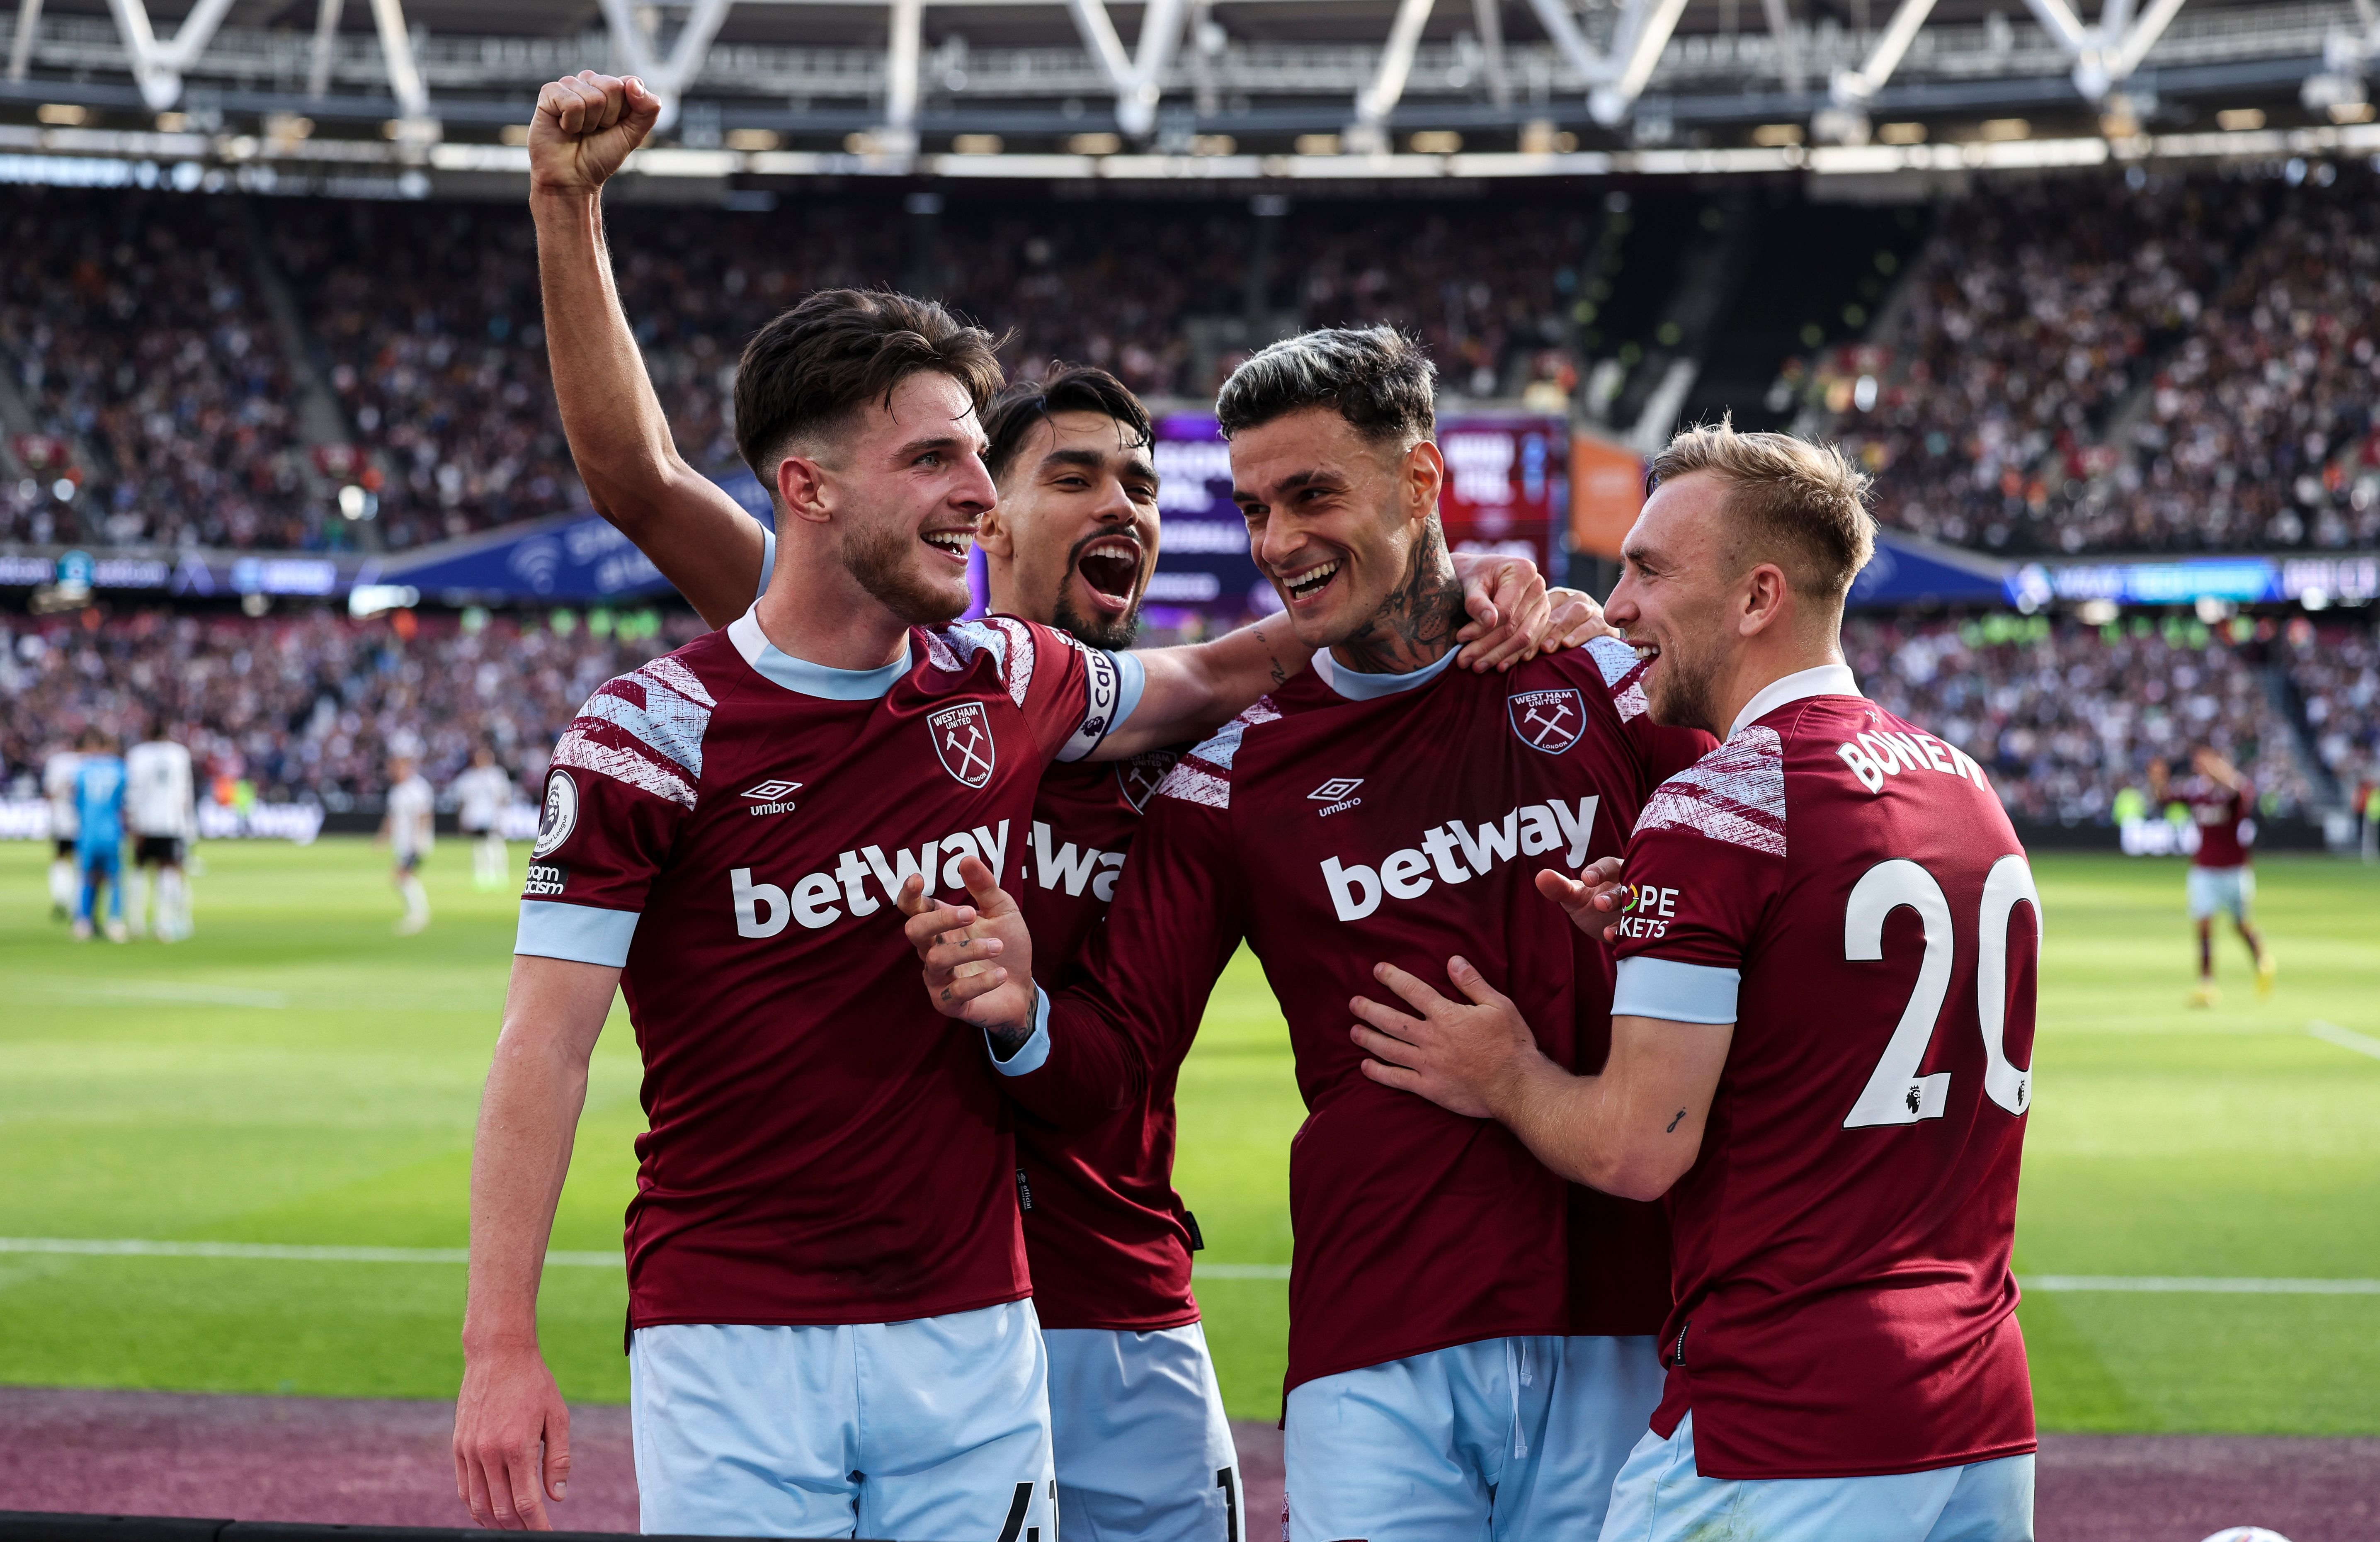 The Hammers celebrate Gianluca Scamacca's goal